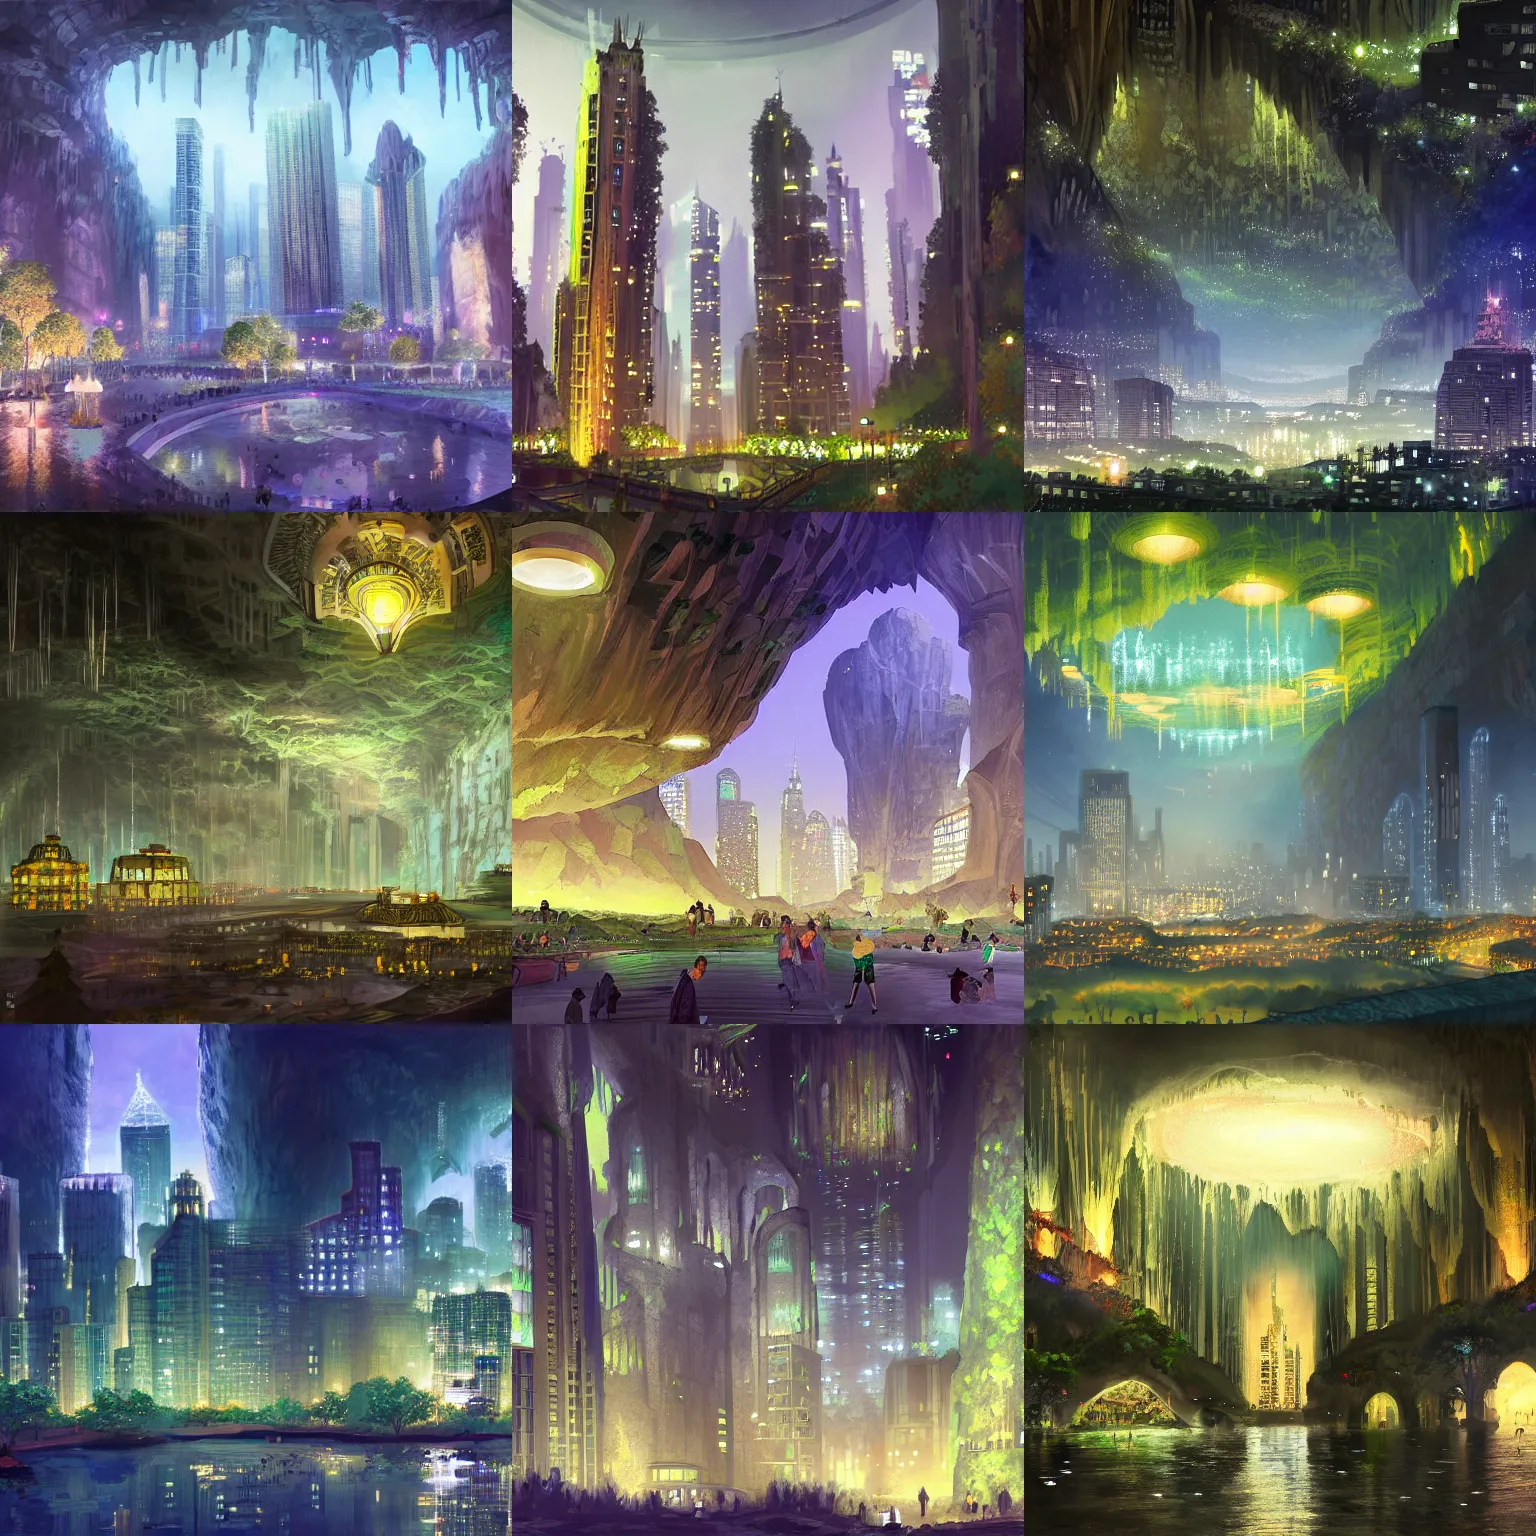 Prompt: a grand city at night with beautiful skyscrapers with glowing lights and green spaces, all inside an enormous cavern, cavern ceiling visible, concept art by wendy zhou